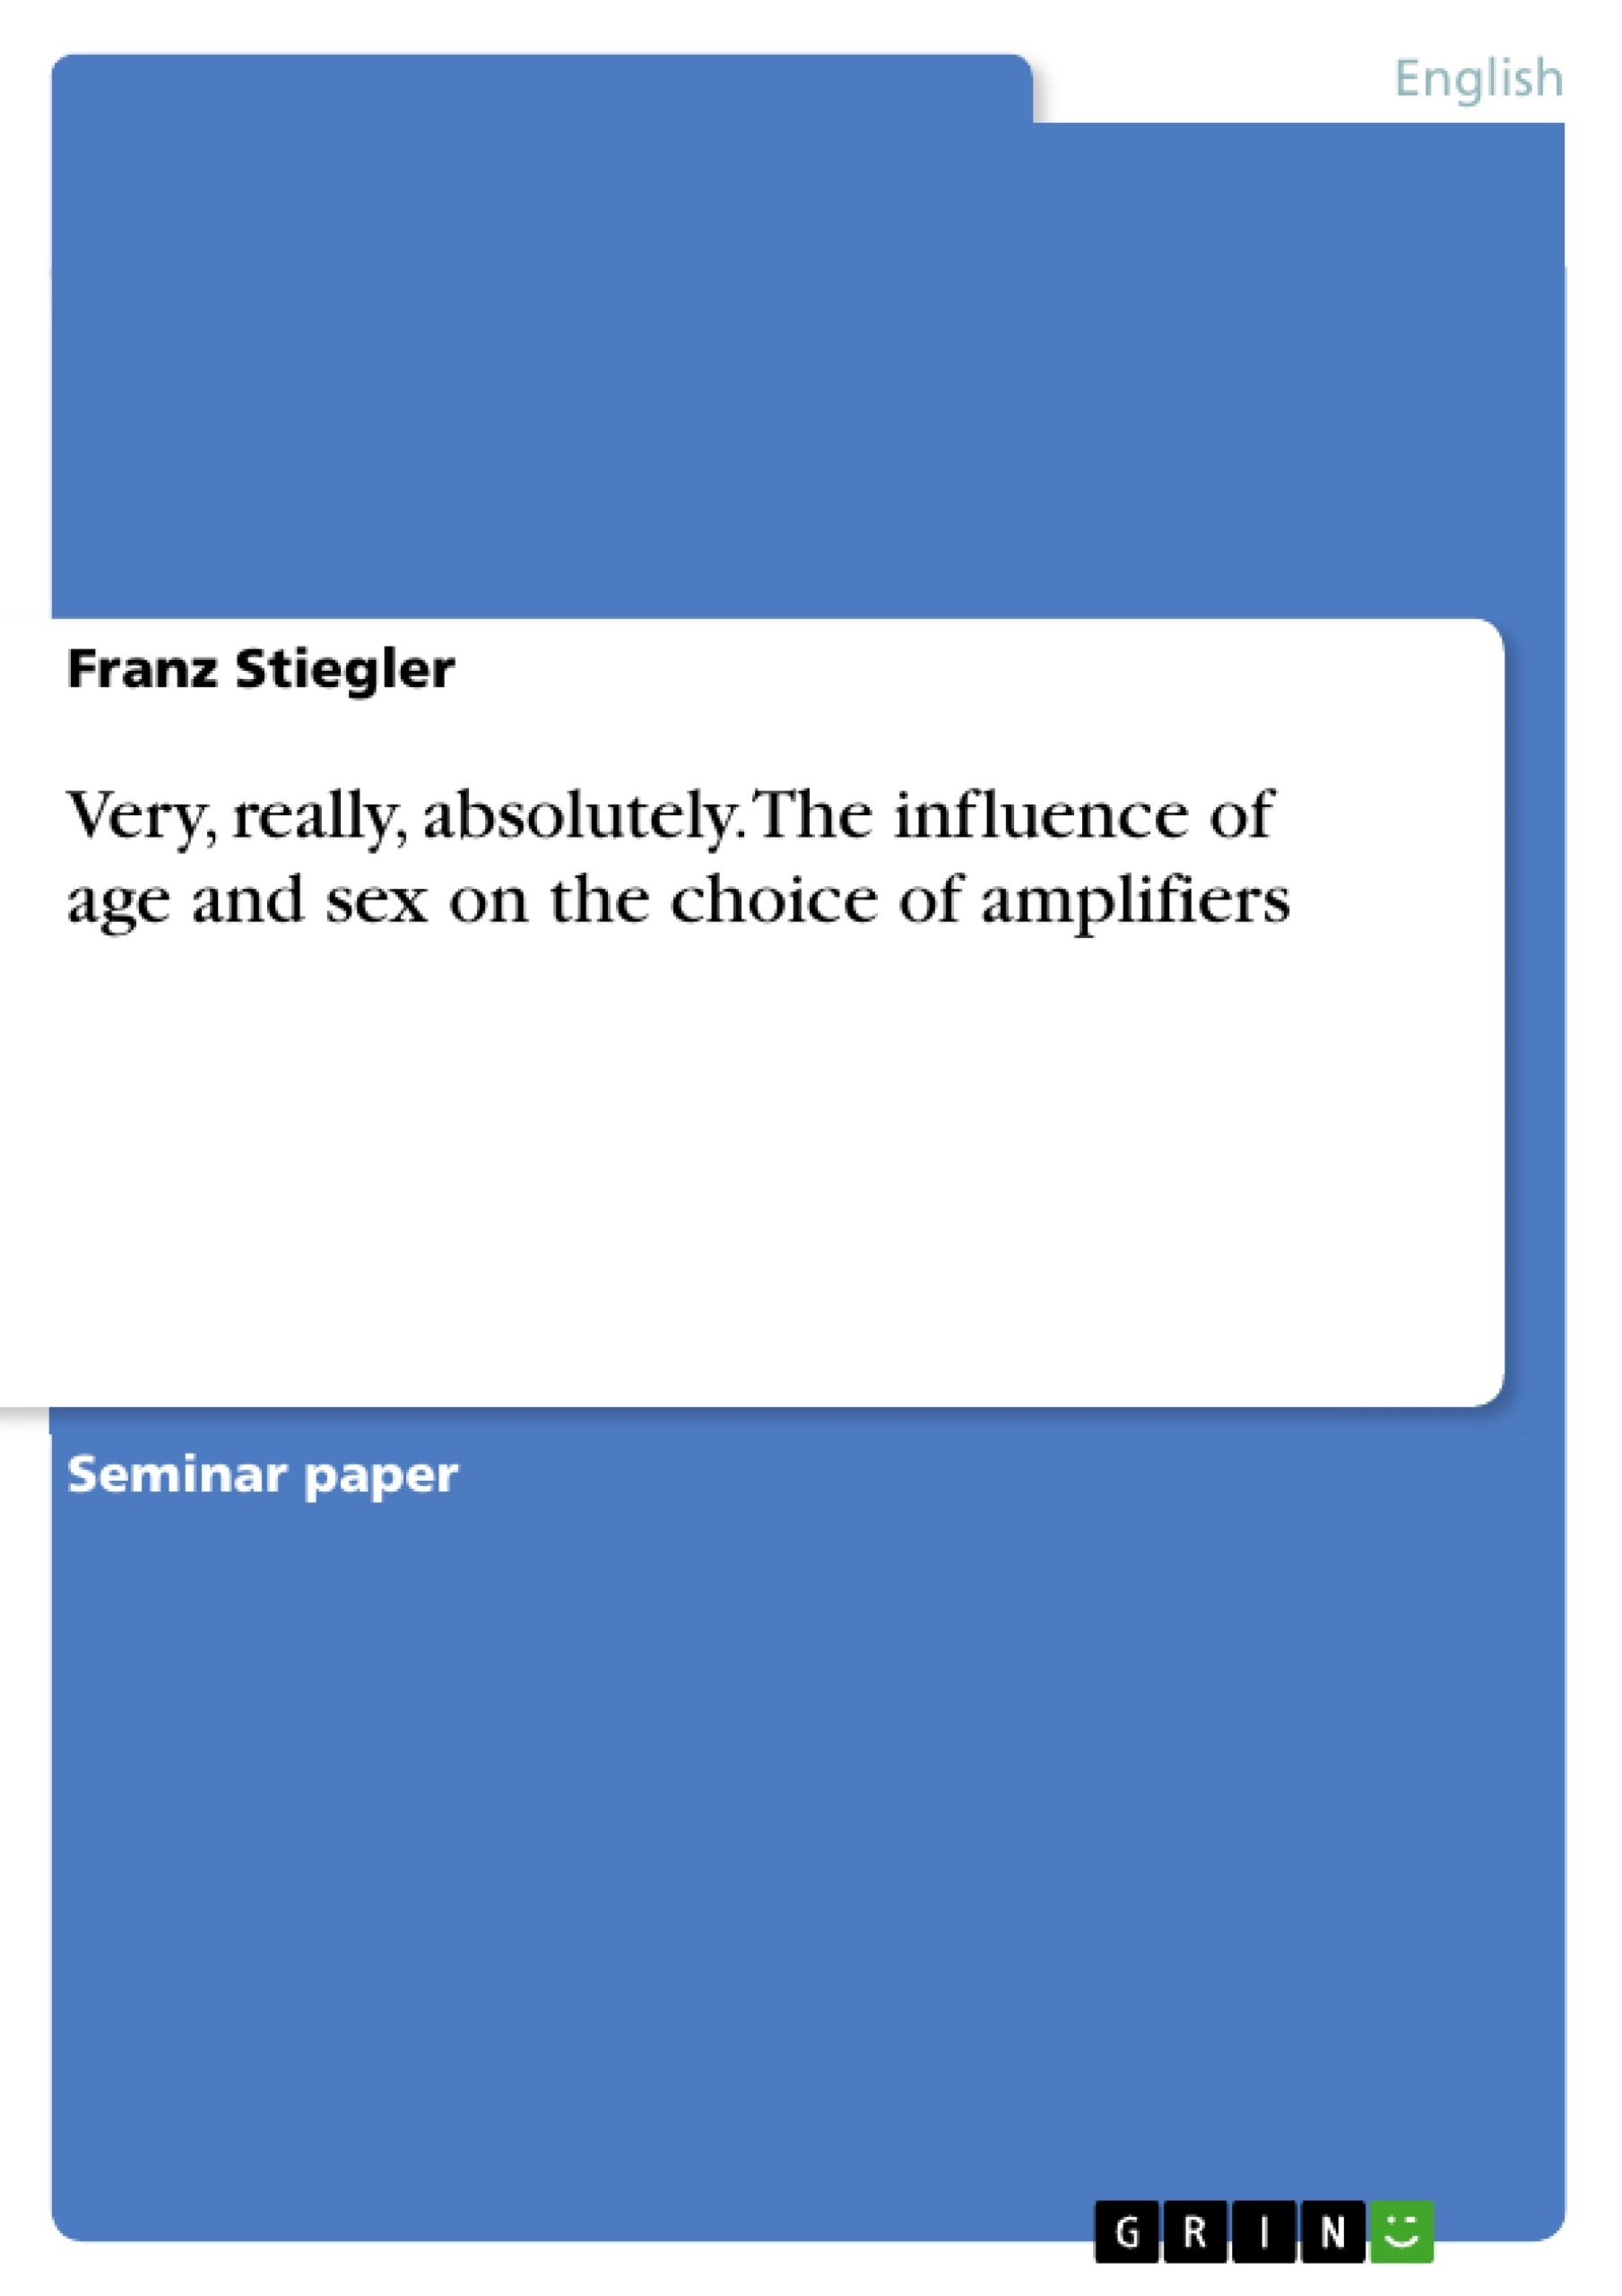 Title: Very, really, absolutely. The influence of age and sex on the choice of amplifiers